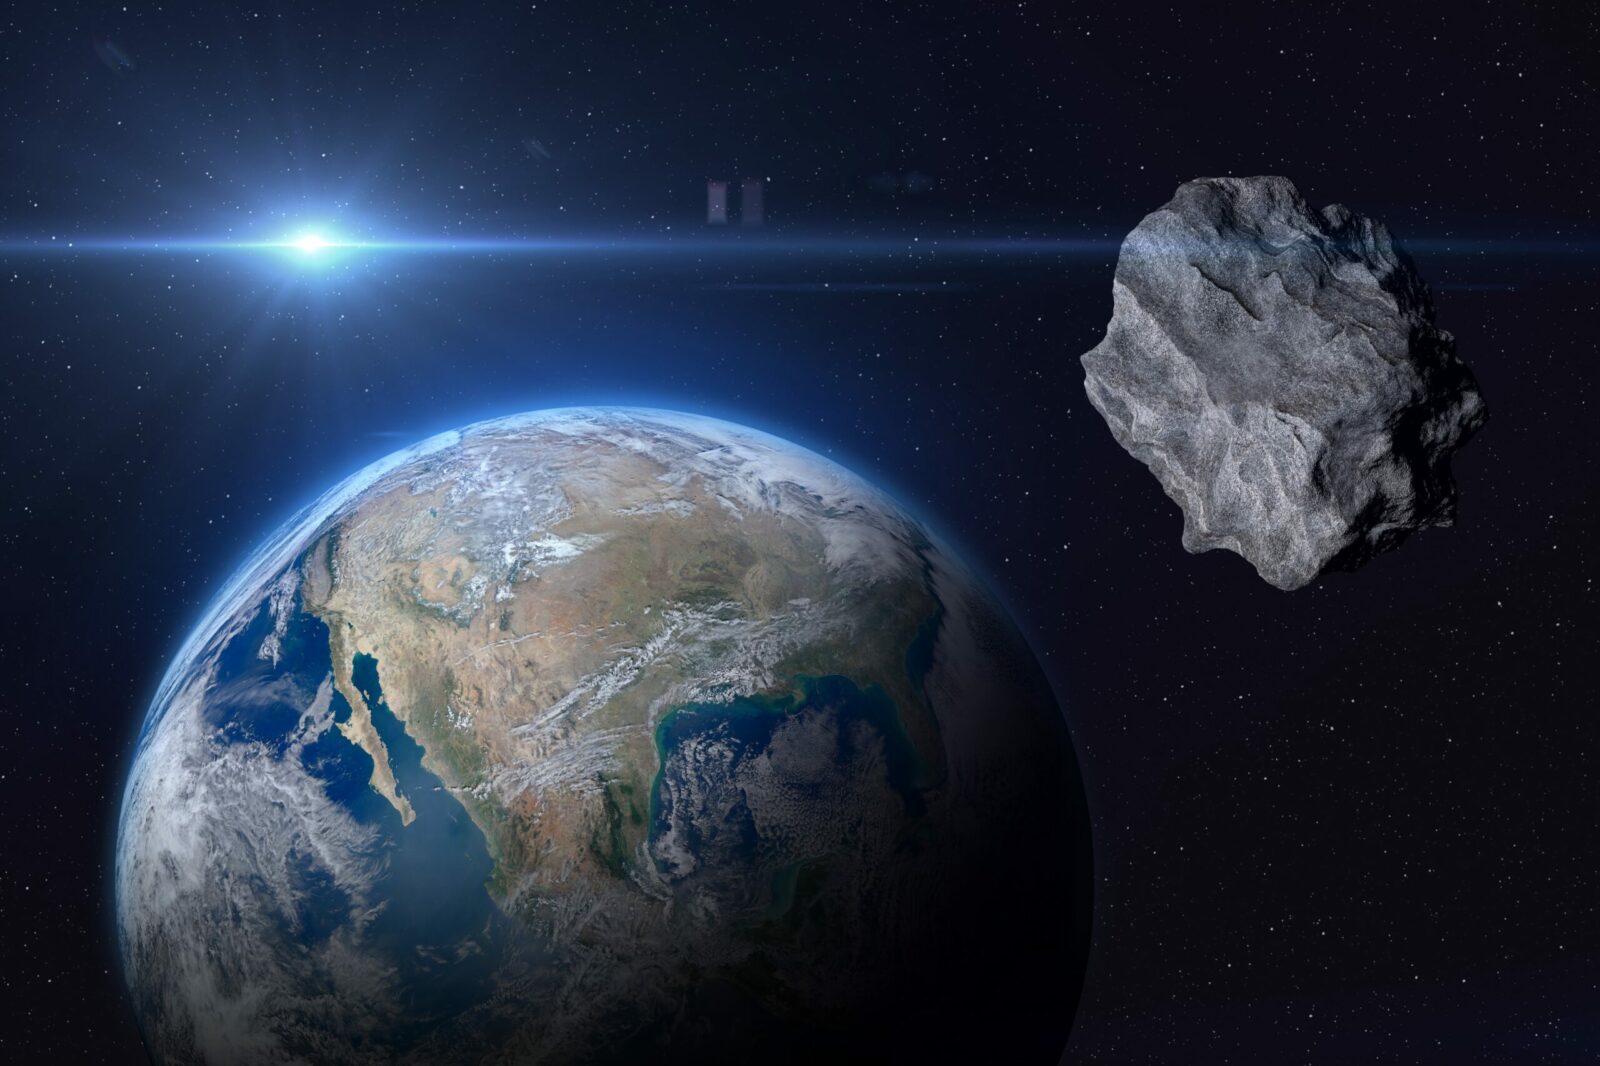 The closest approach of an asteroid to Earth occurs on Saturday